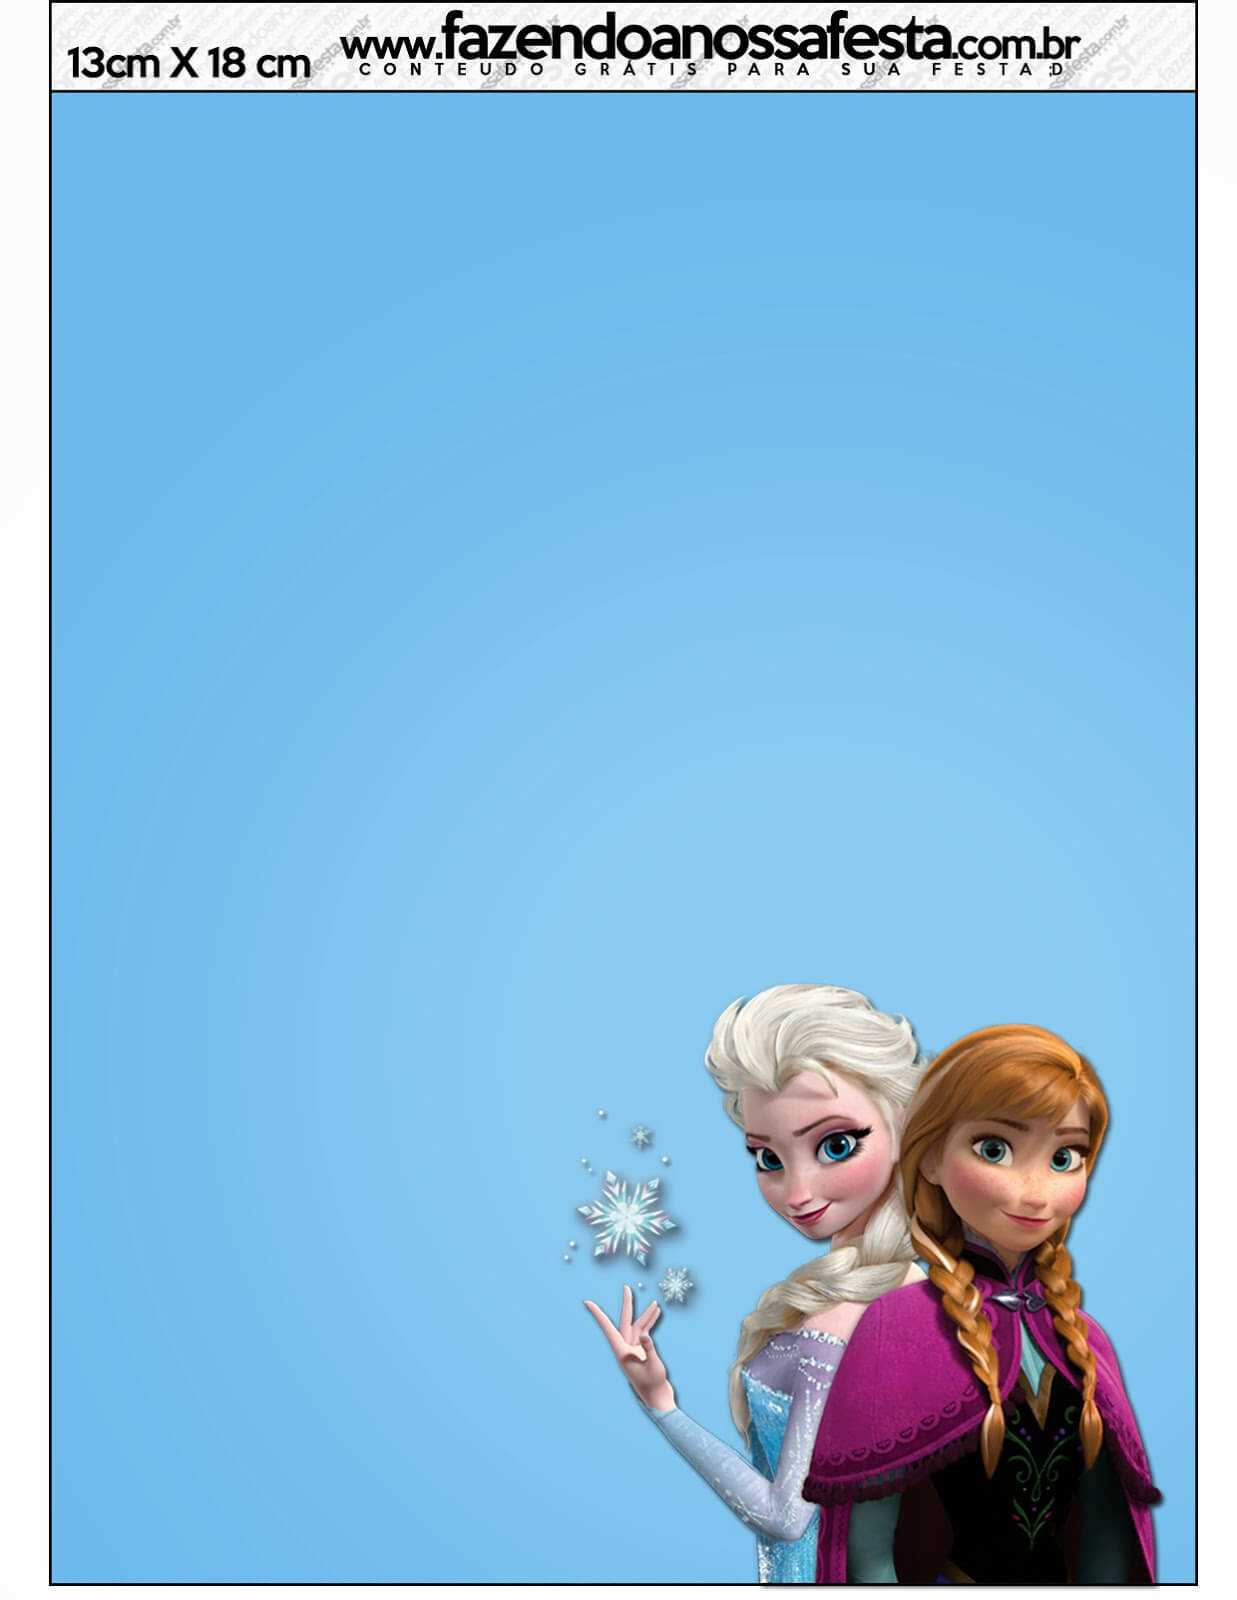 Frozen Free Printable Cards Or Party Invitations Oh My Intended For Frozen Birthday Card 